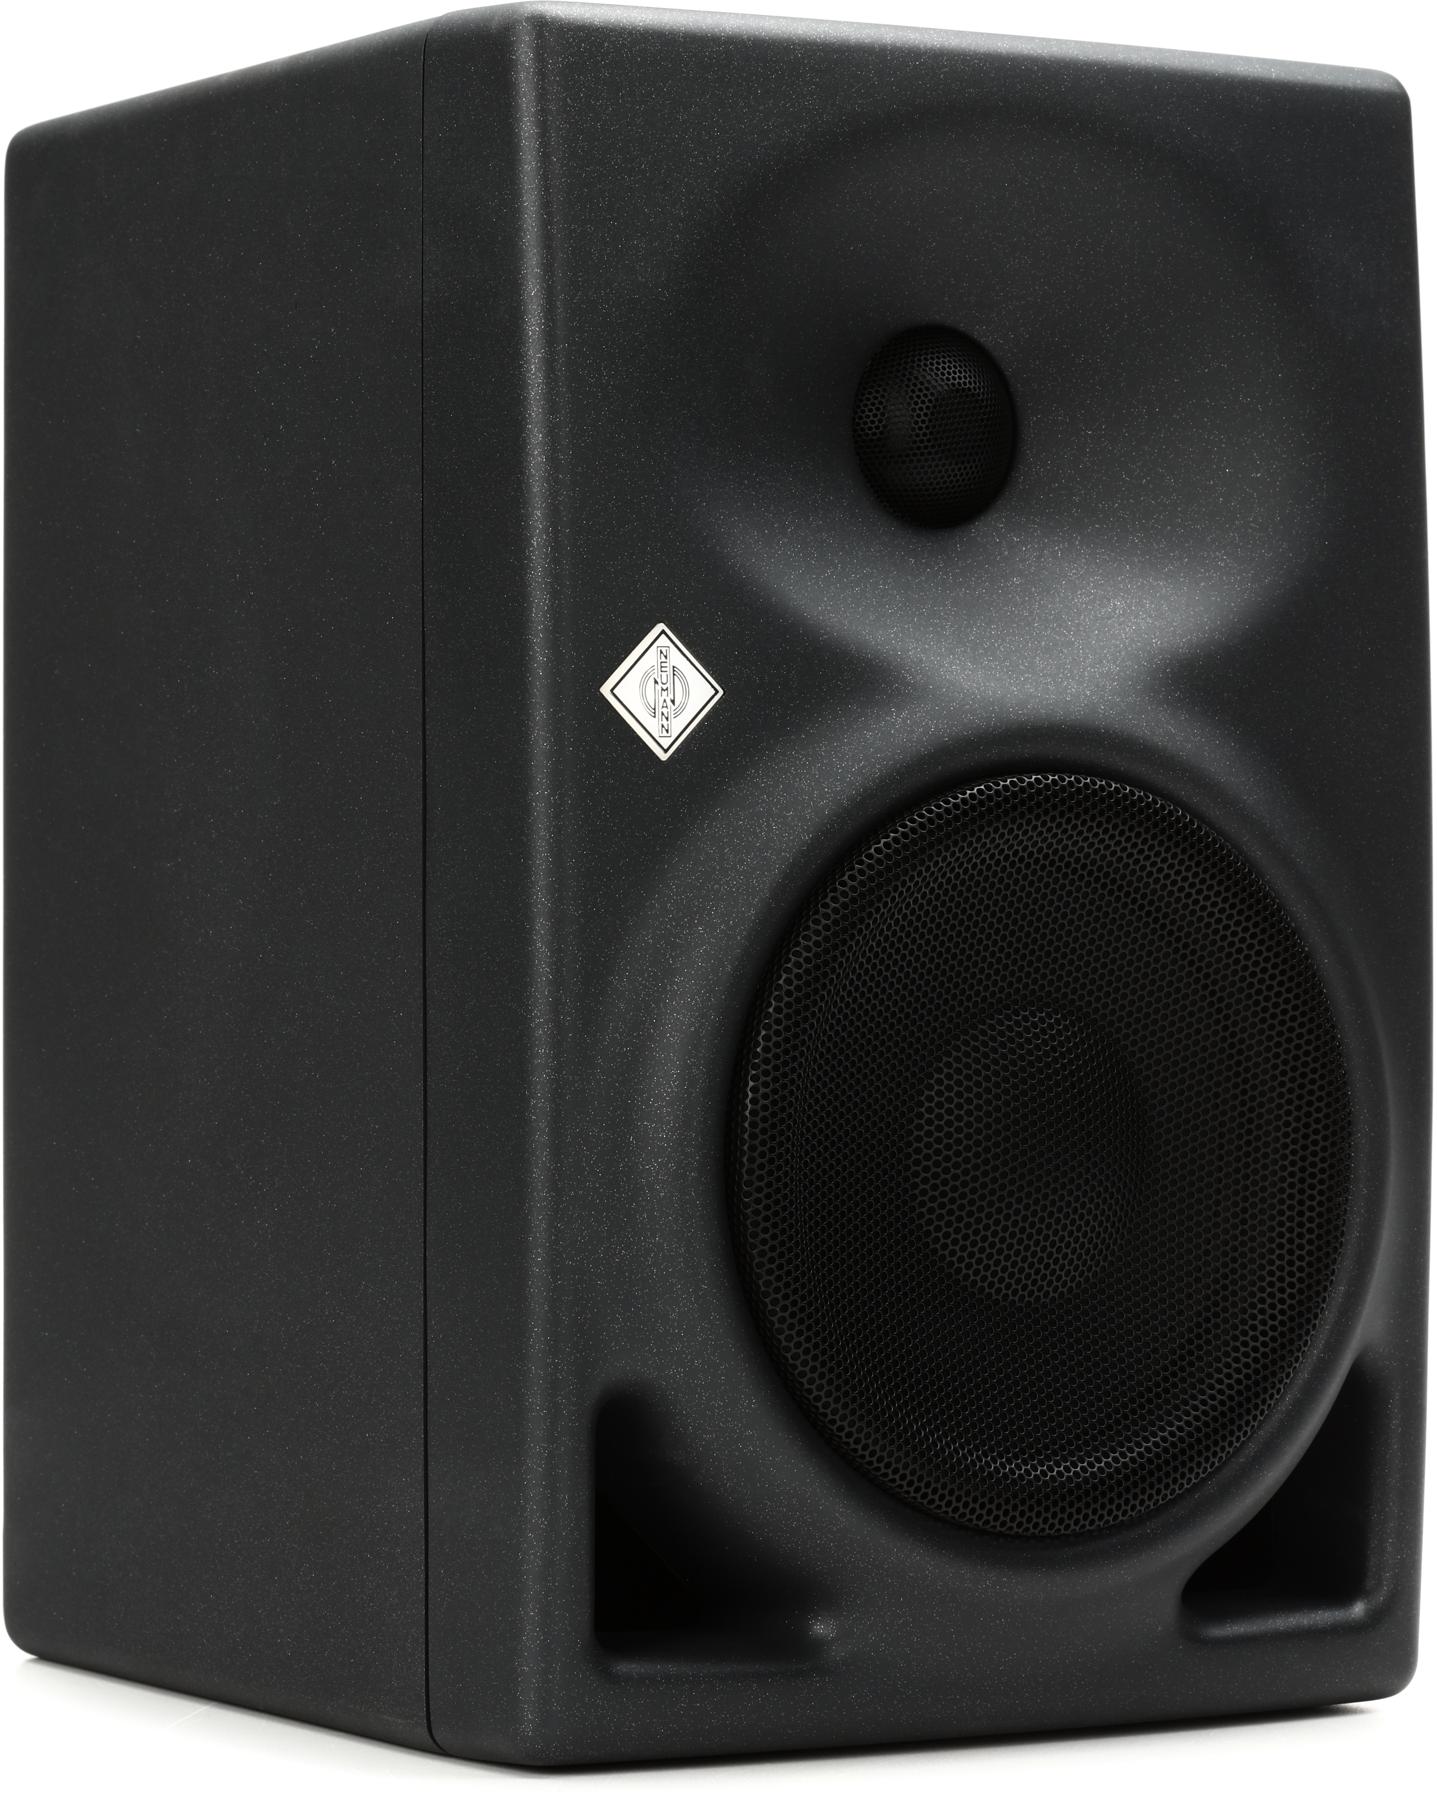 Neumann KH 120 A 5.25 inch Powered Studio Monitor - Anthracite-image